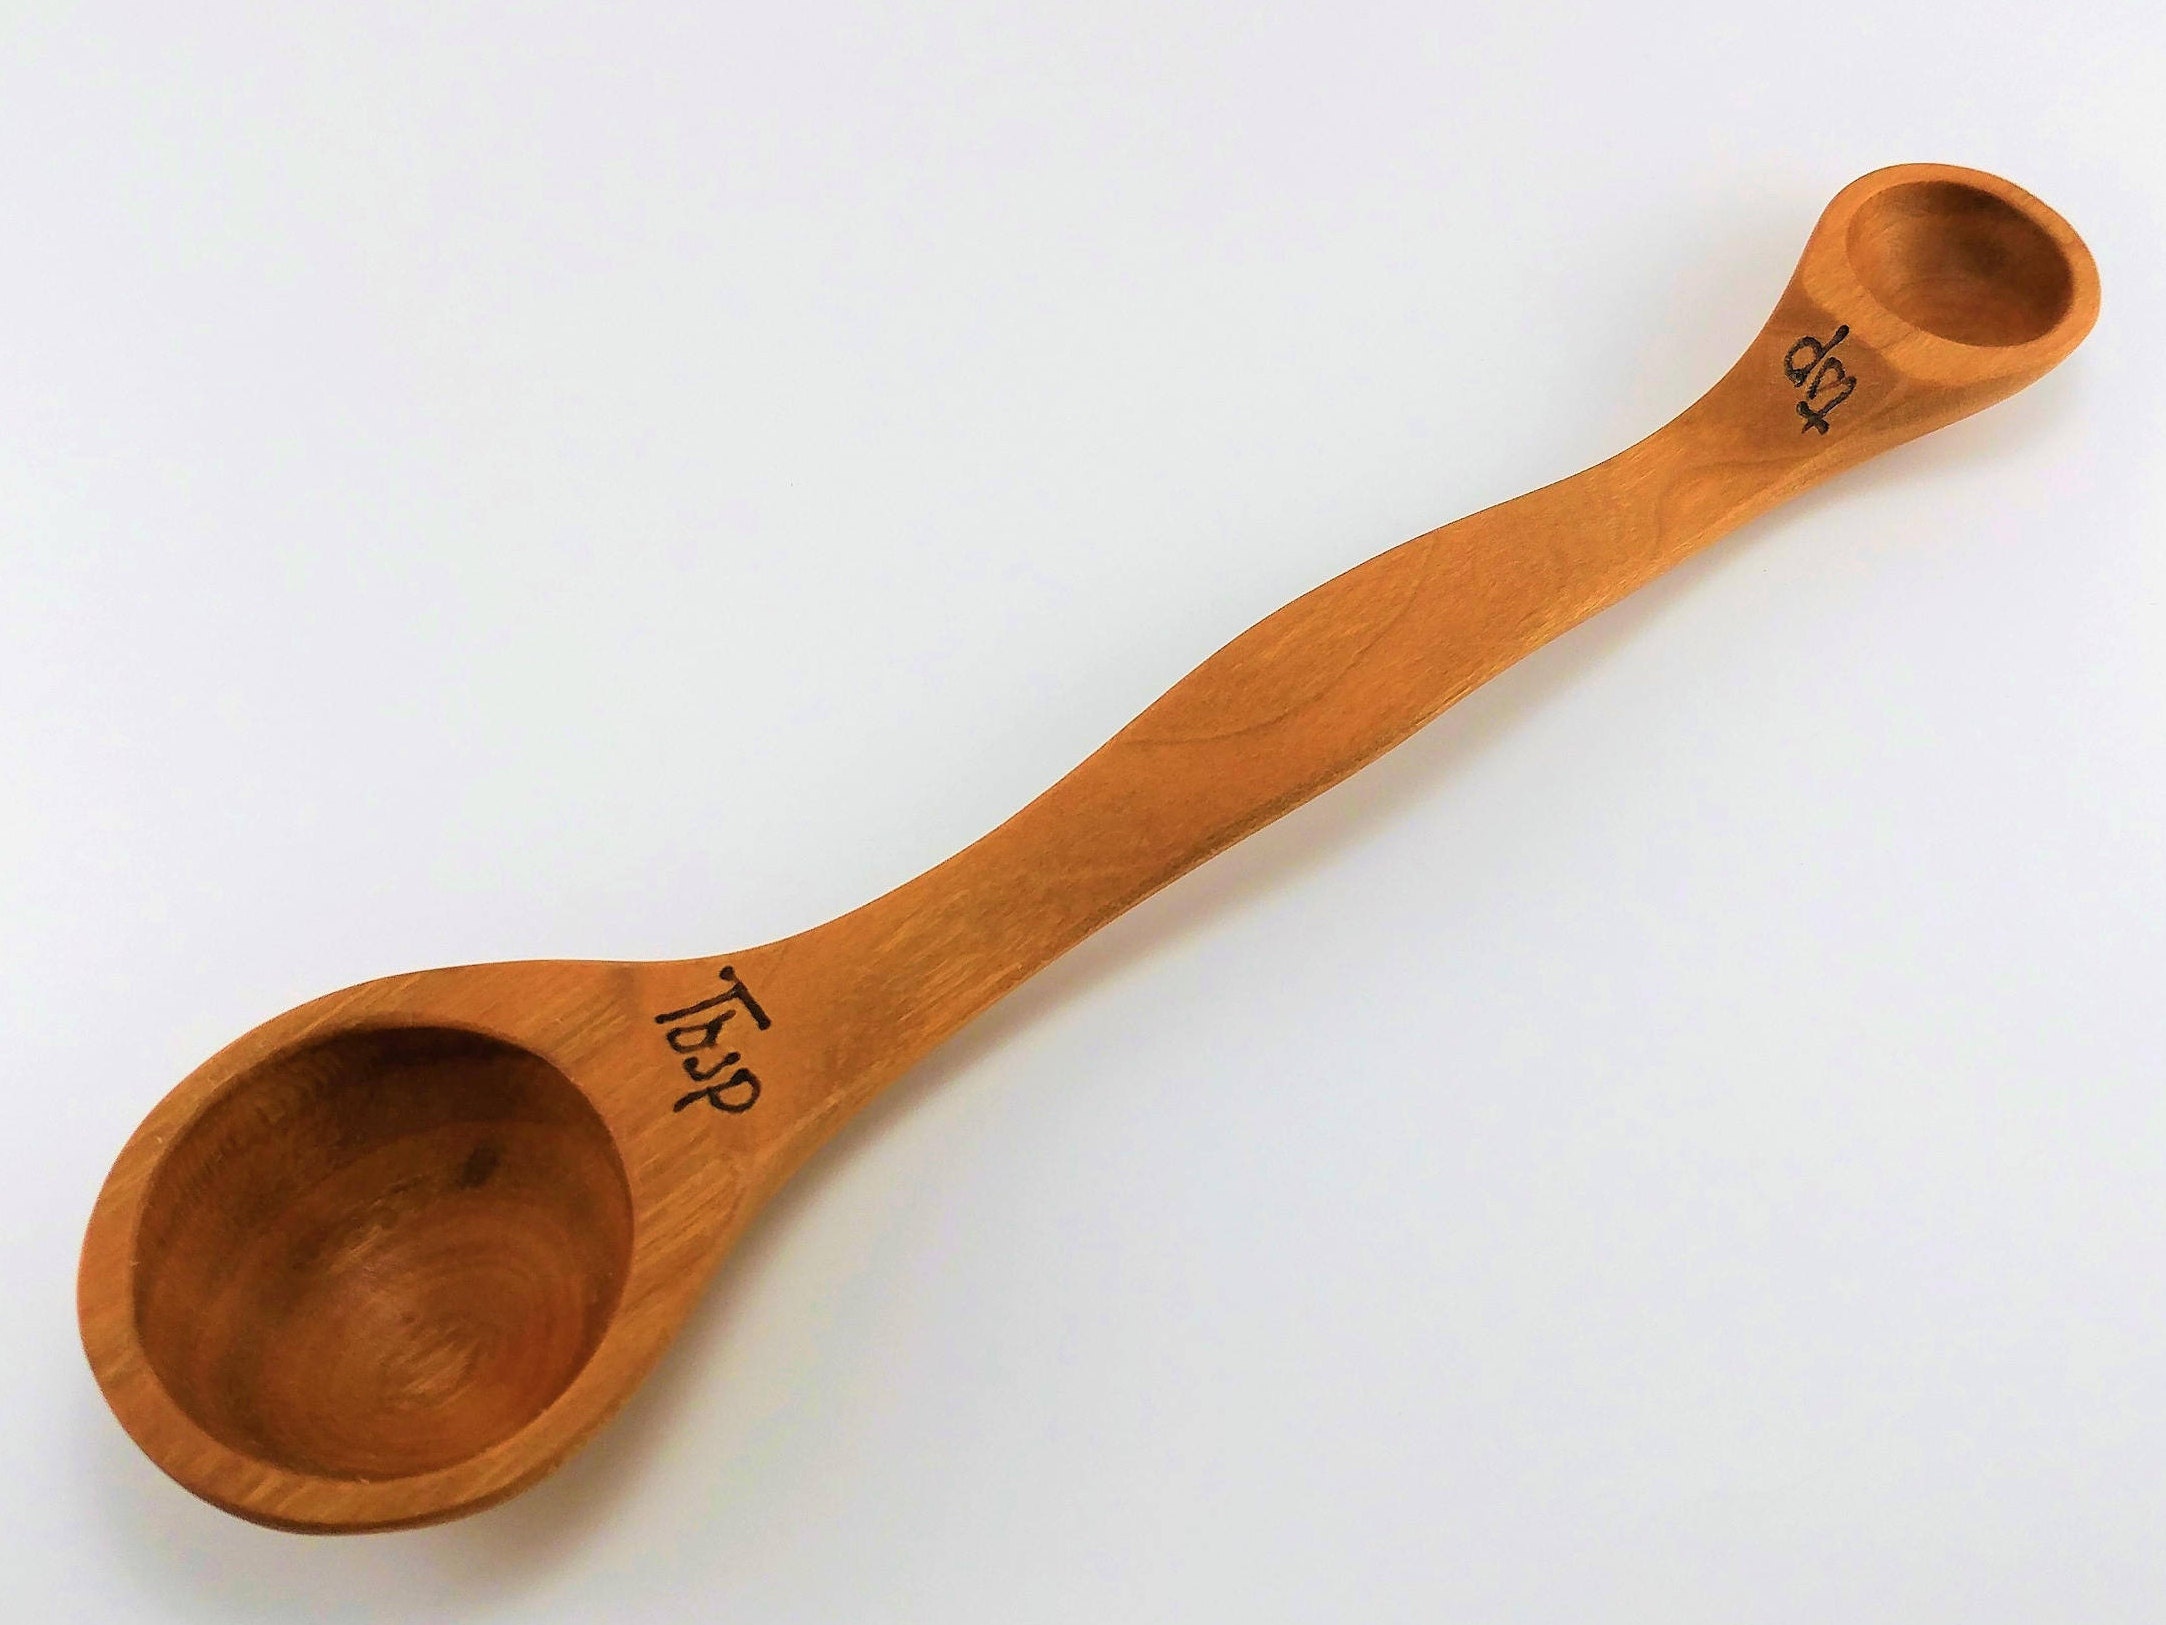 Two Headed Measuring Spoon | Wooden, Cherry Wood